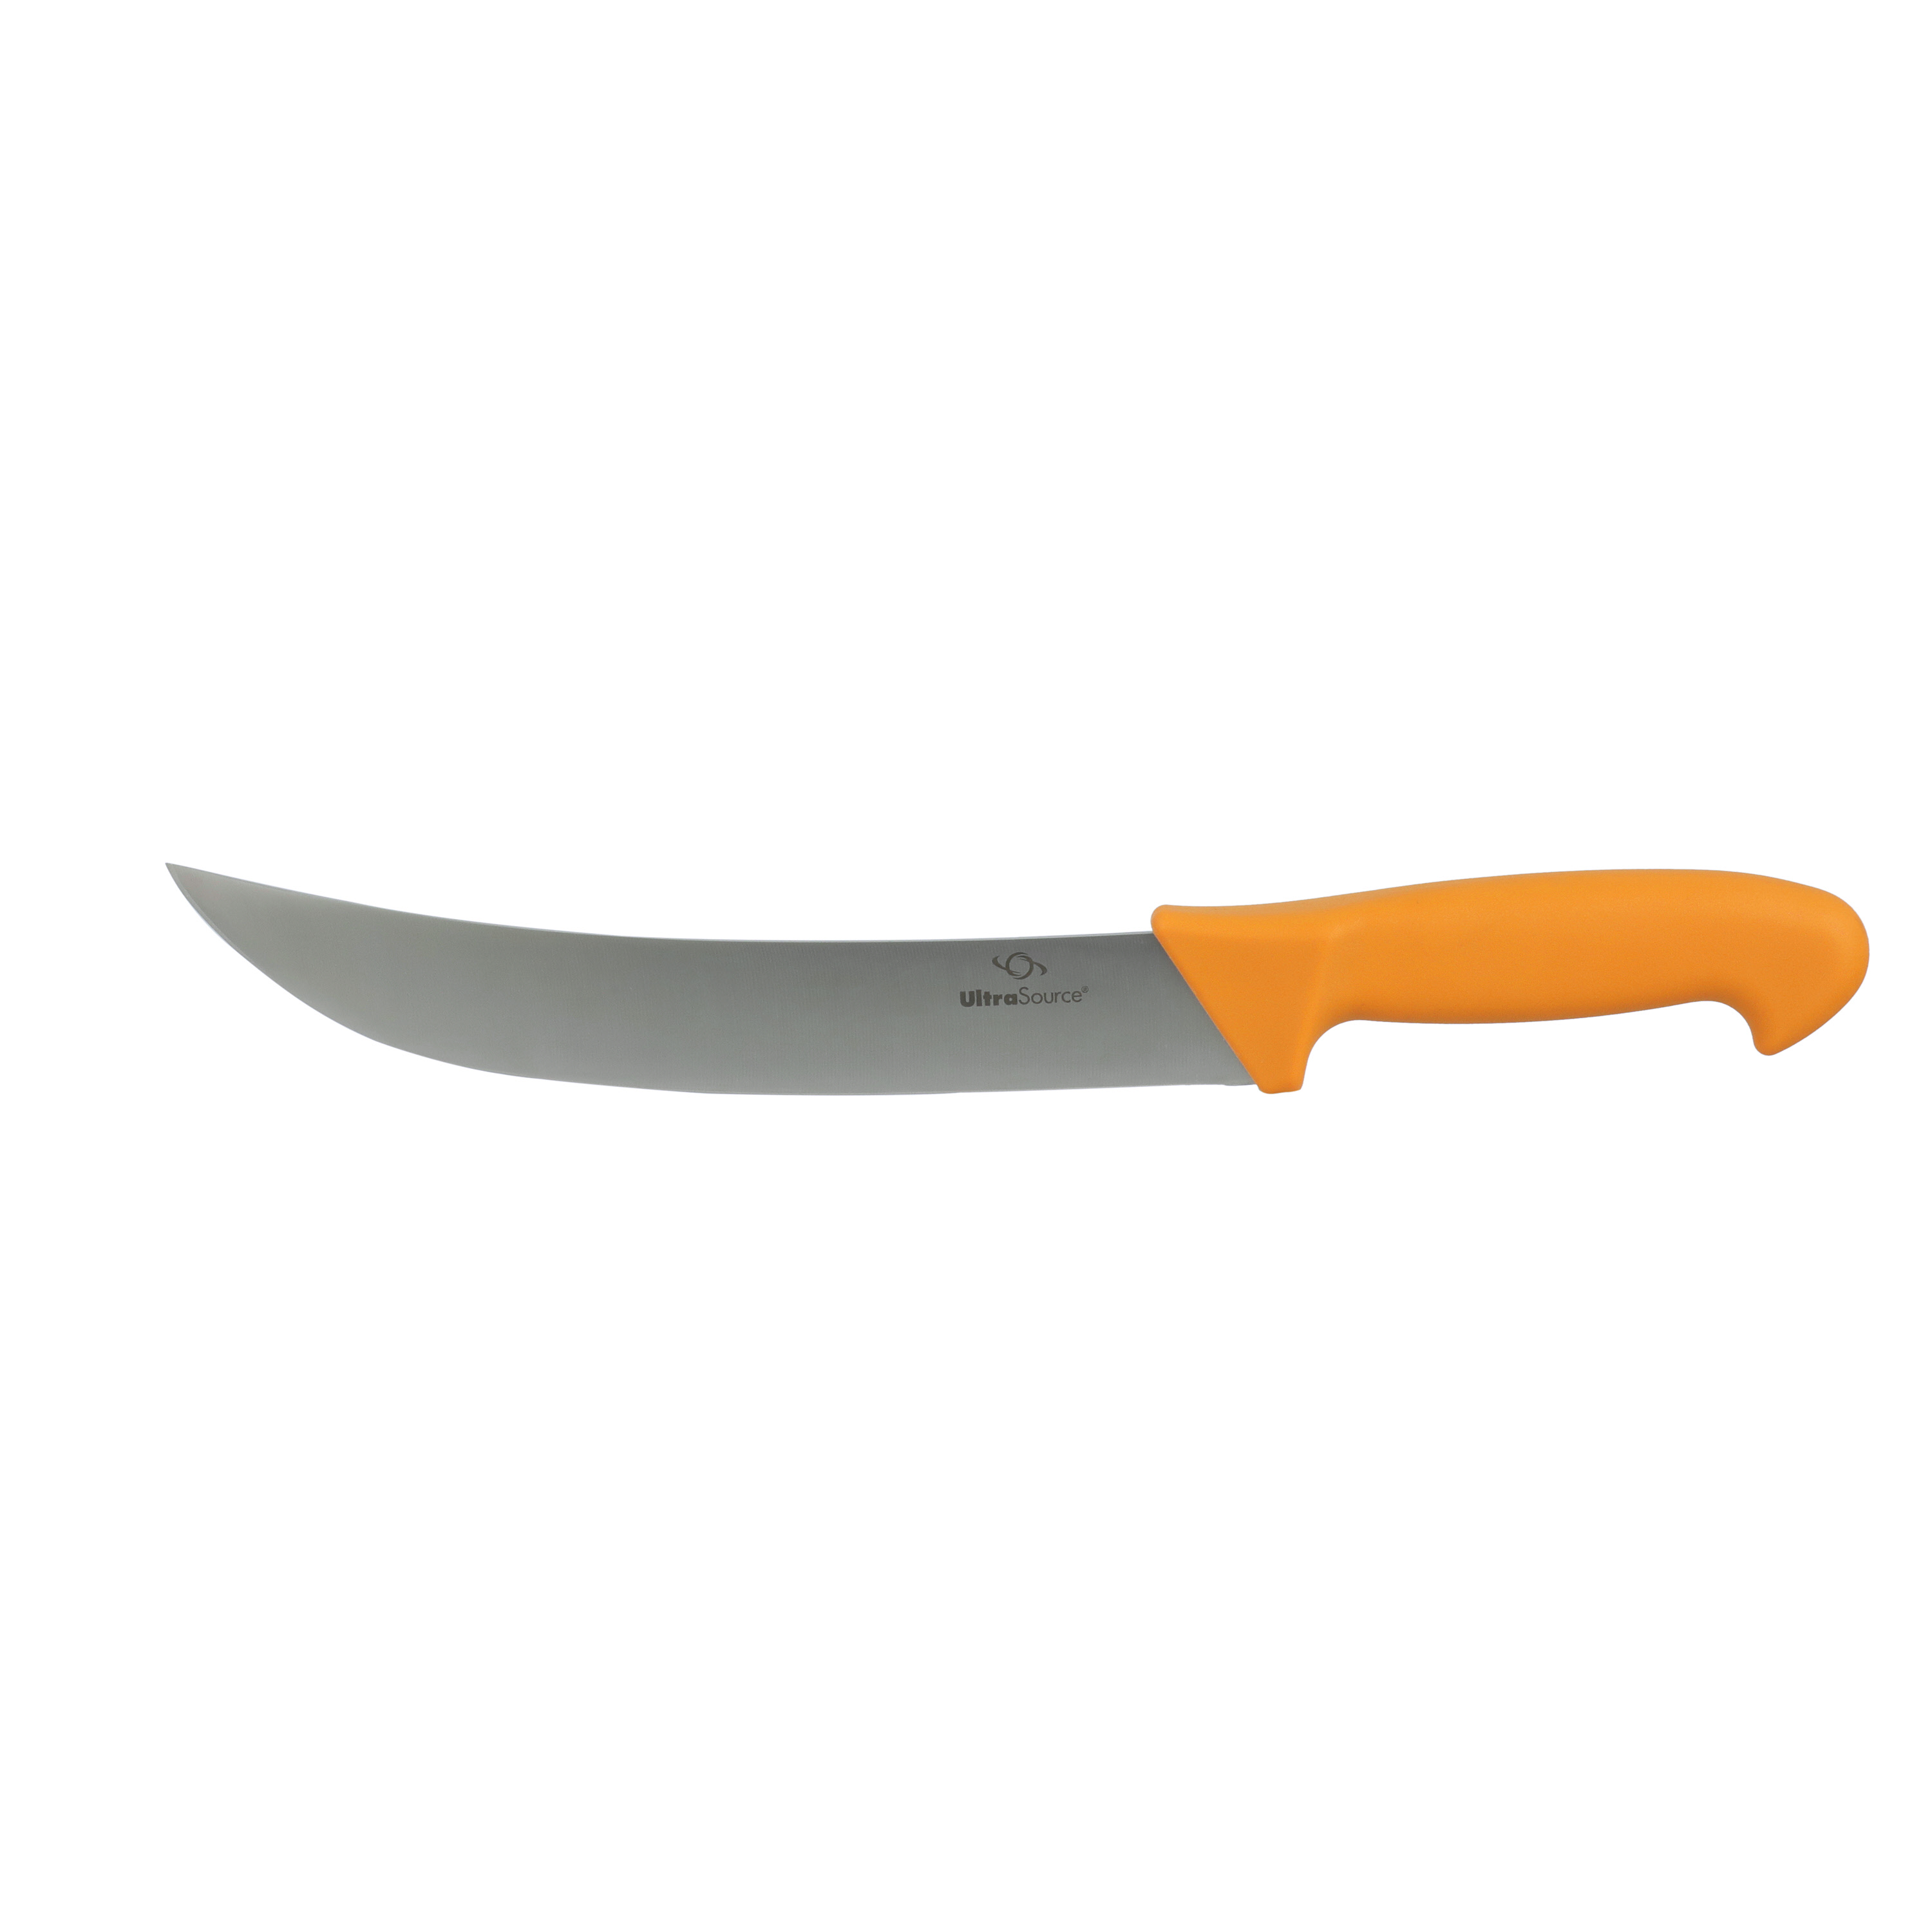 Cutlery - Industrial Boning, Breaking & Butcher Knives and Sharpeners